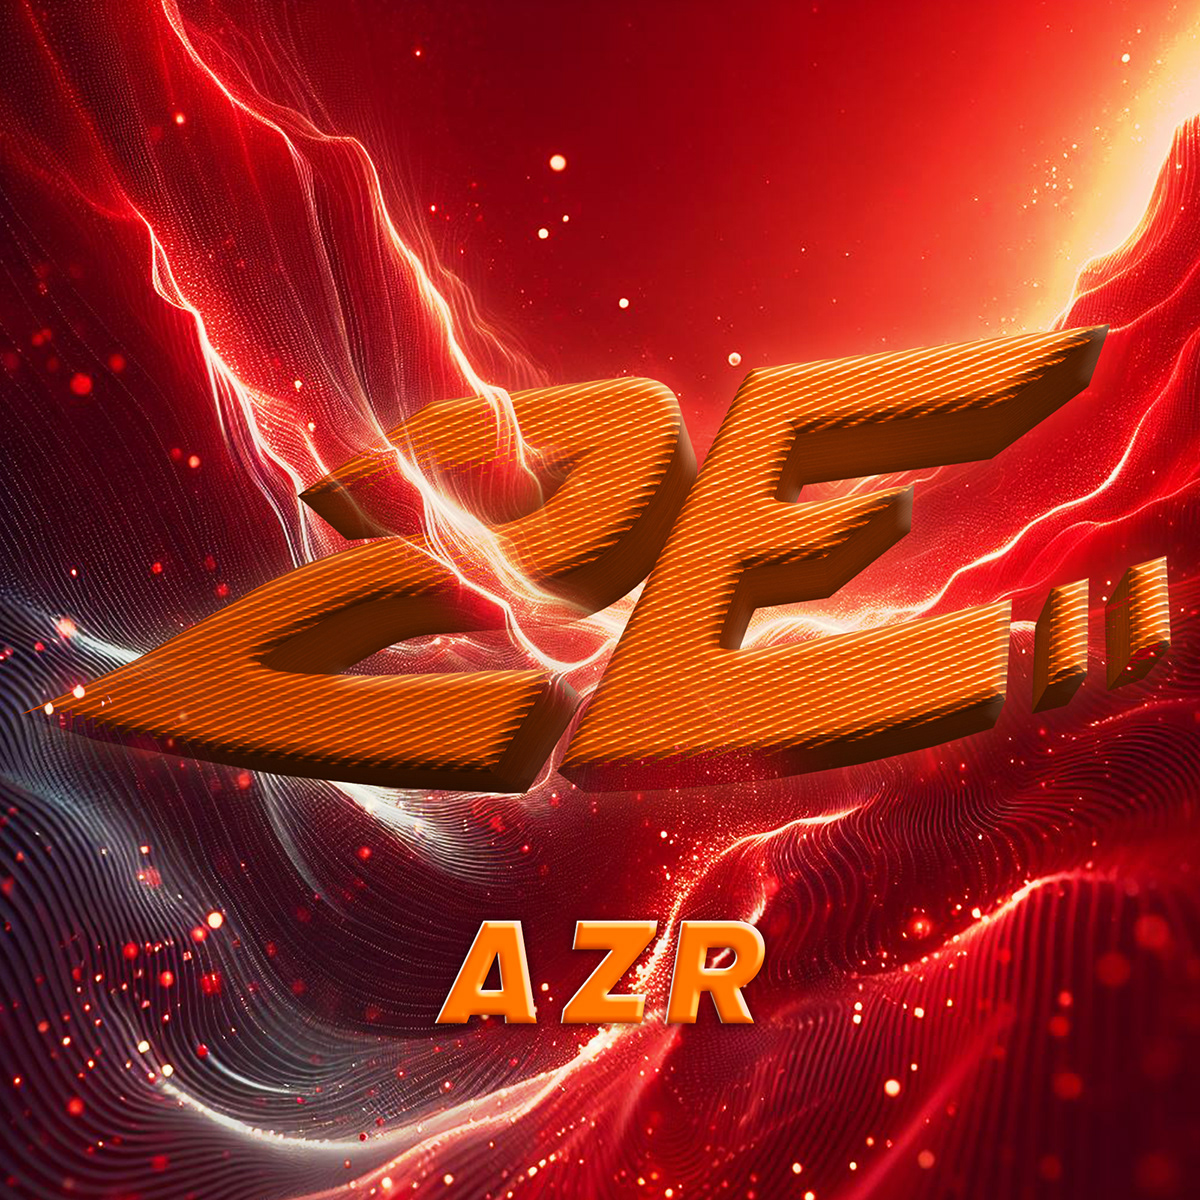 Twitter Avi gfx photoshop Gaming Profile Pictures